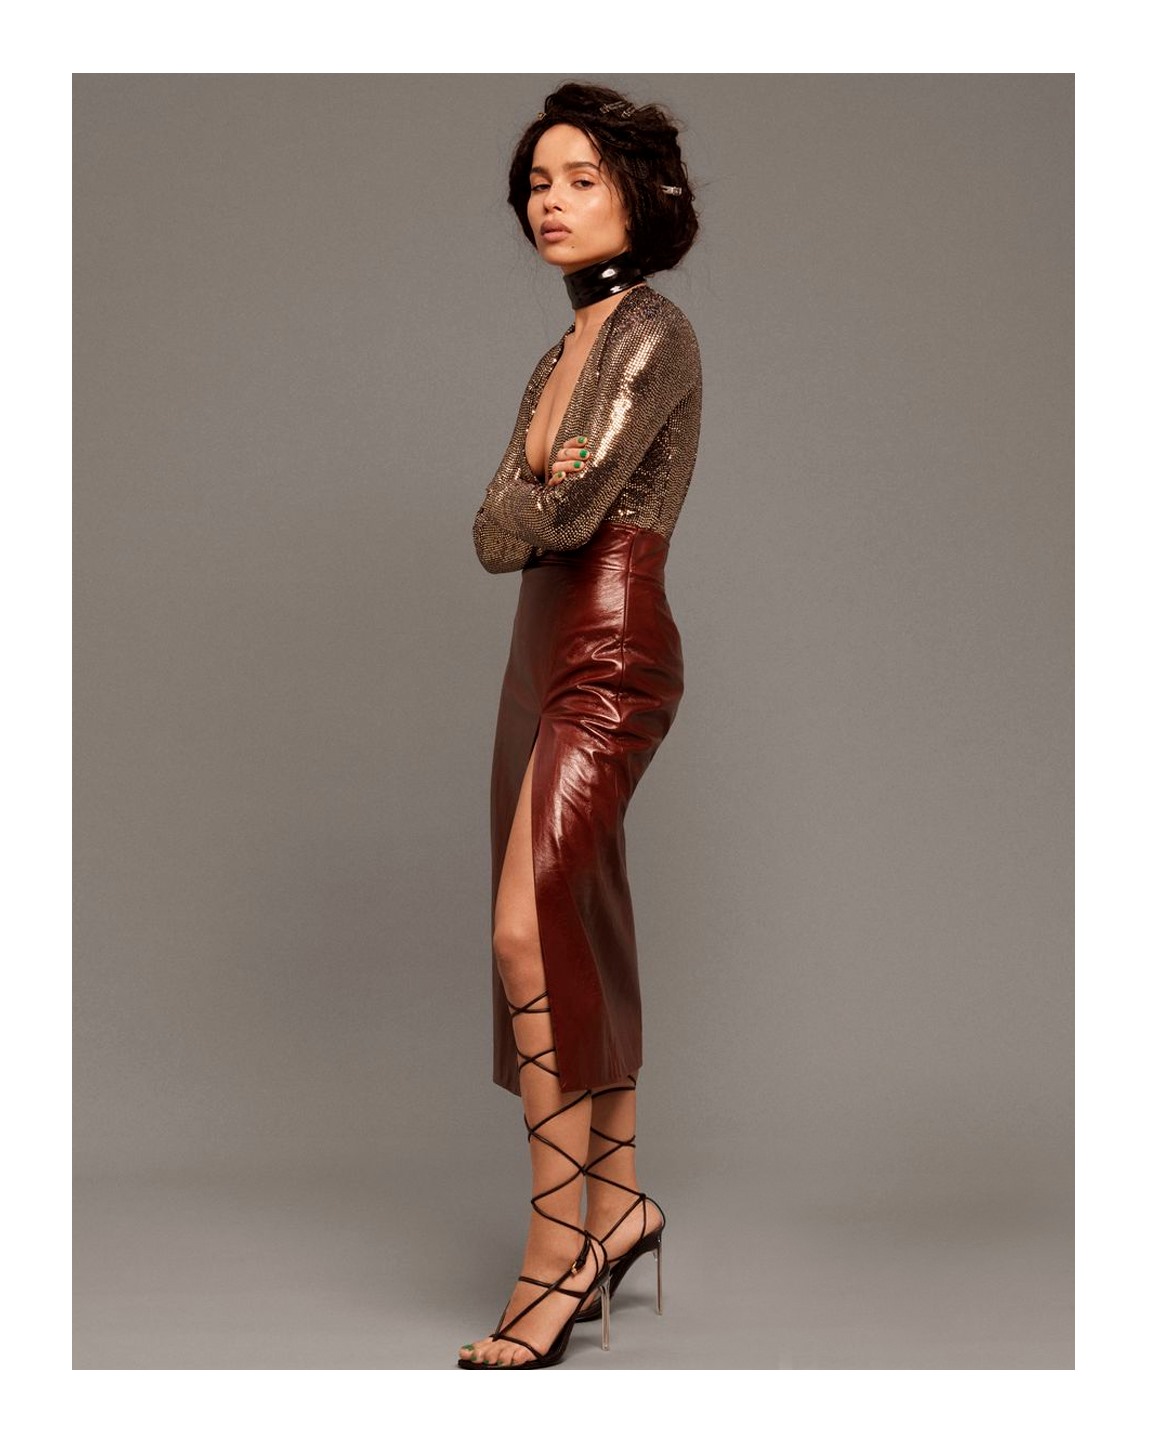 Zoë Kravitz appears in the February issue of Elle USA wearing a deep-v neck long sleeve top and leather skirt with side slit from Gucci Spring Summer 2020 by Alessandro Michele. 